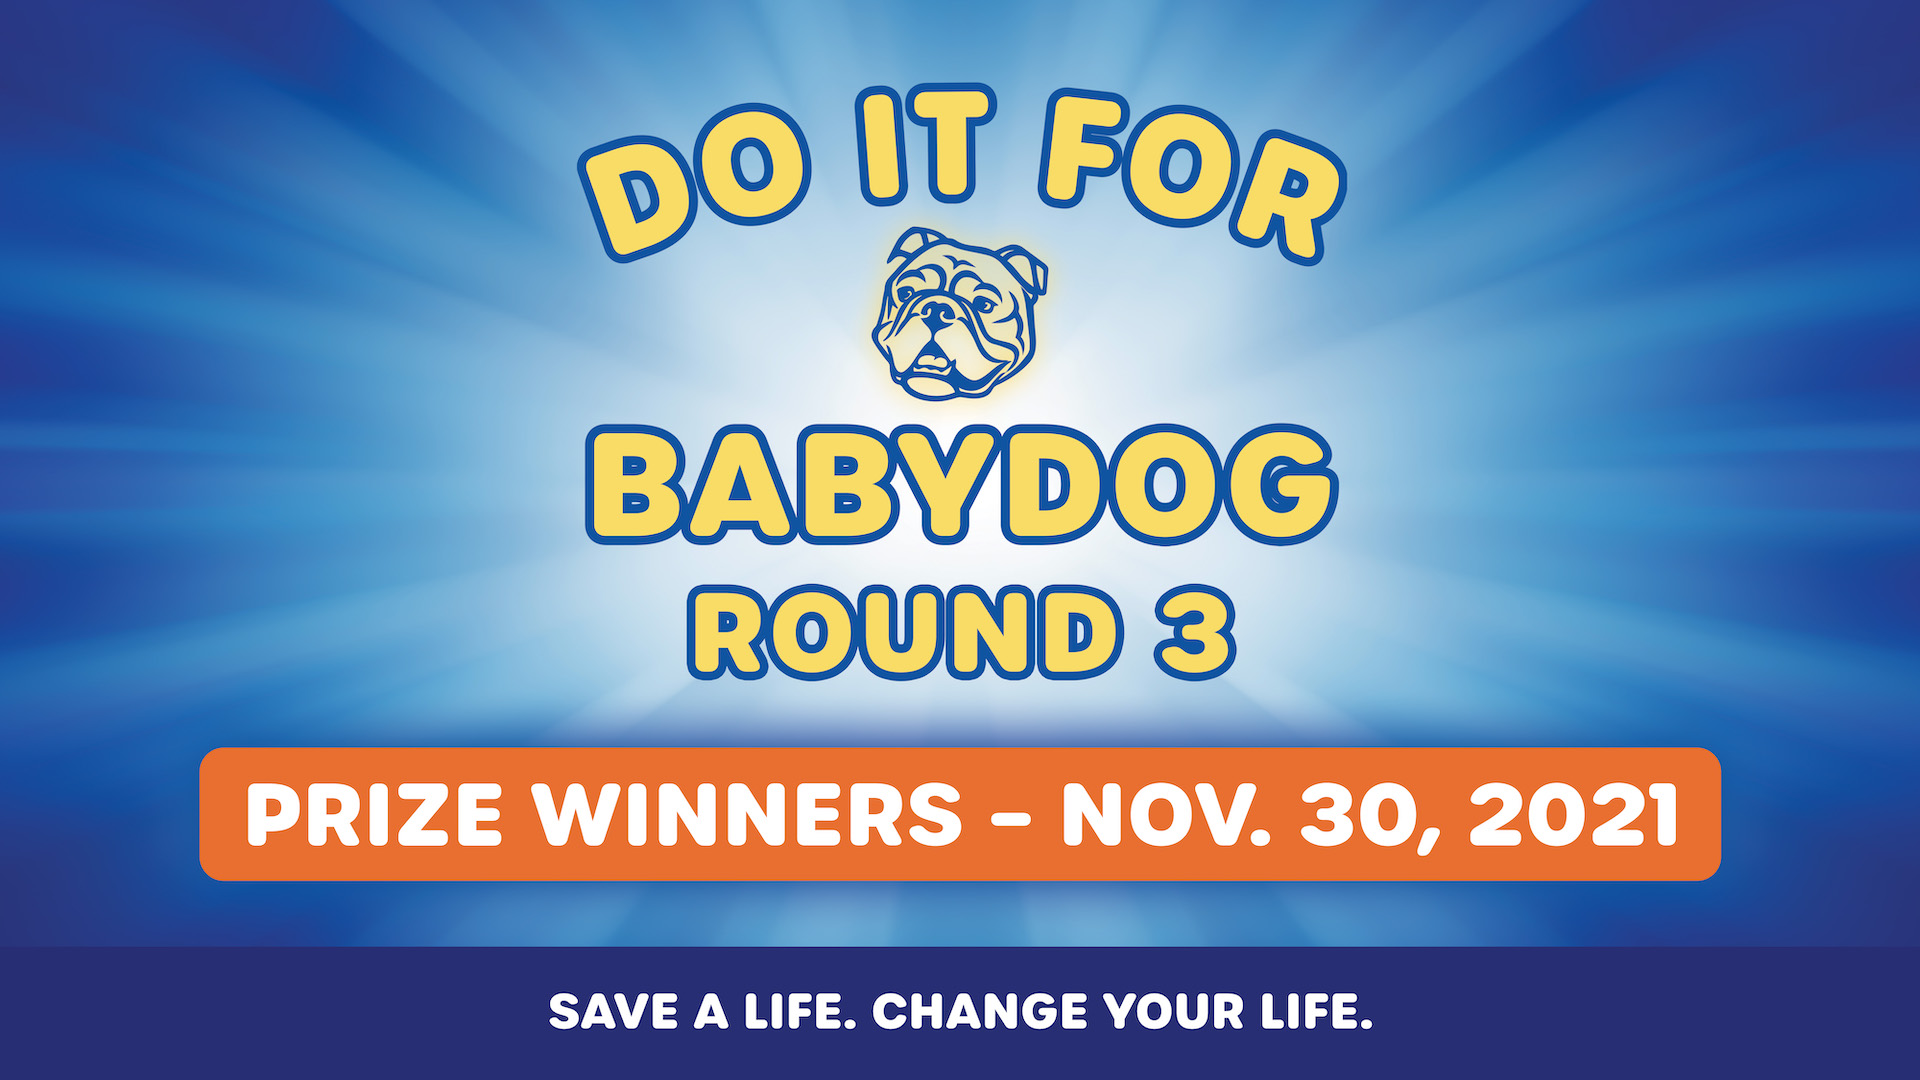 Do it for Babydog Round 3: Gov. Justice announces prize winners in vaccination sweepstakes – November 30, 2021 - Governor Jim Justice